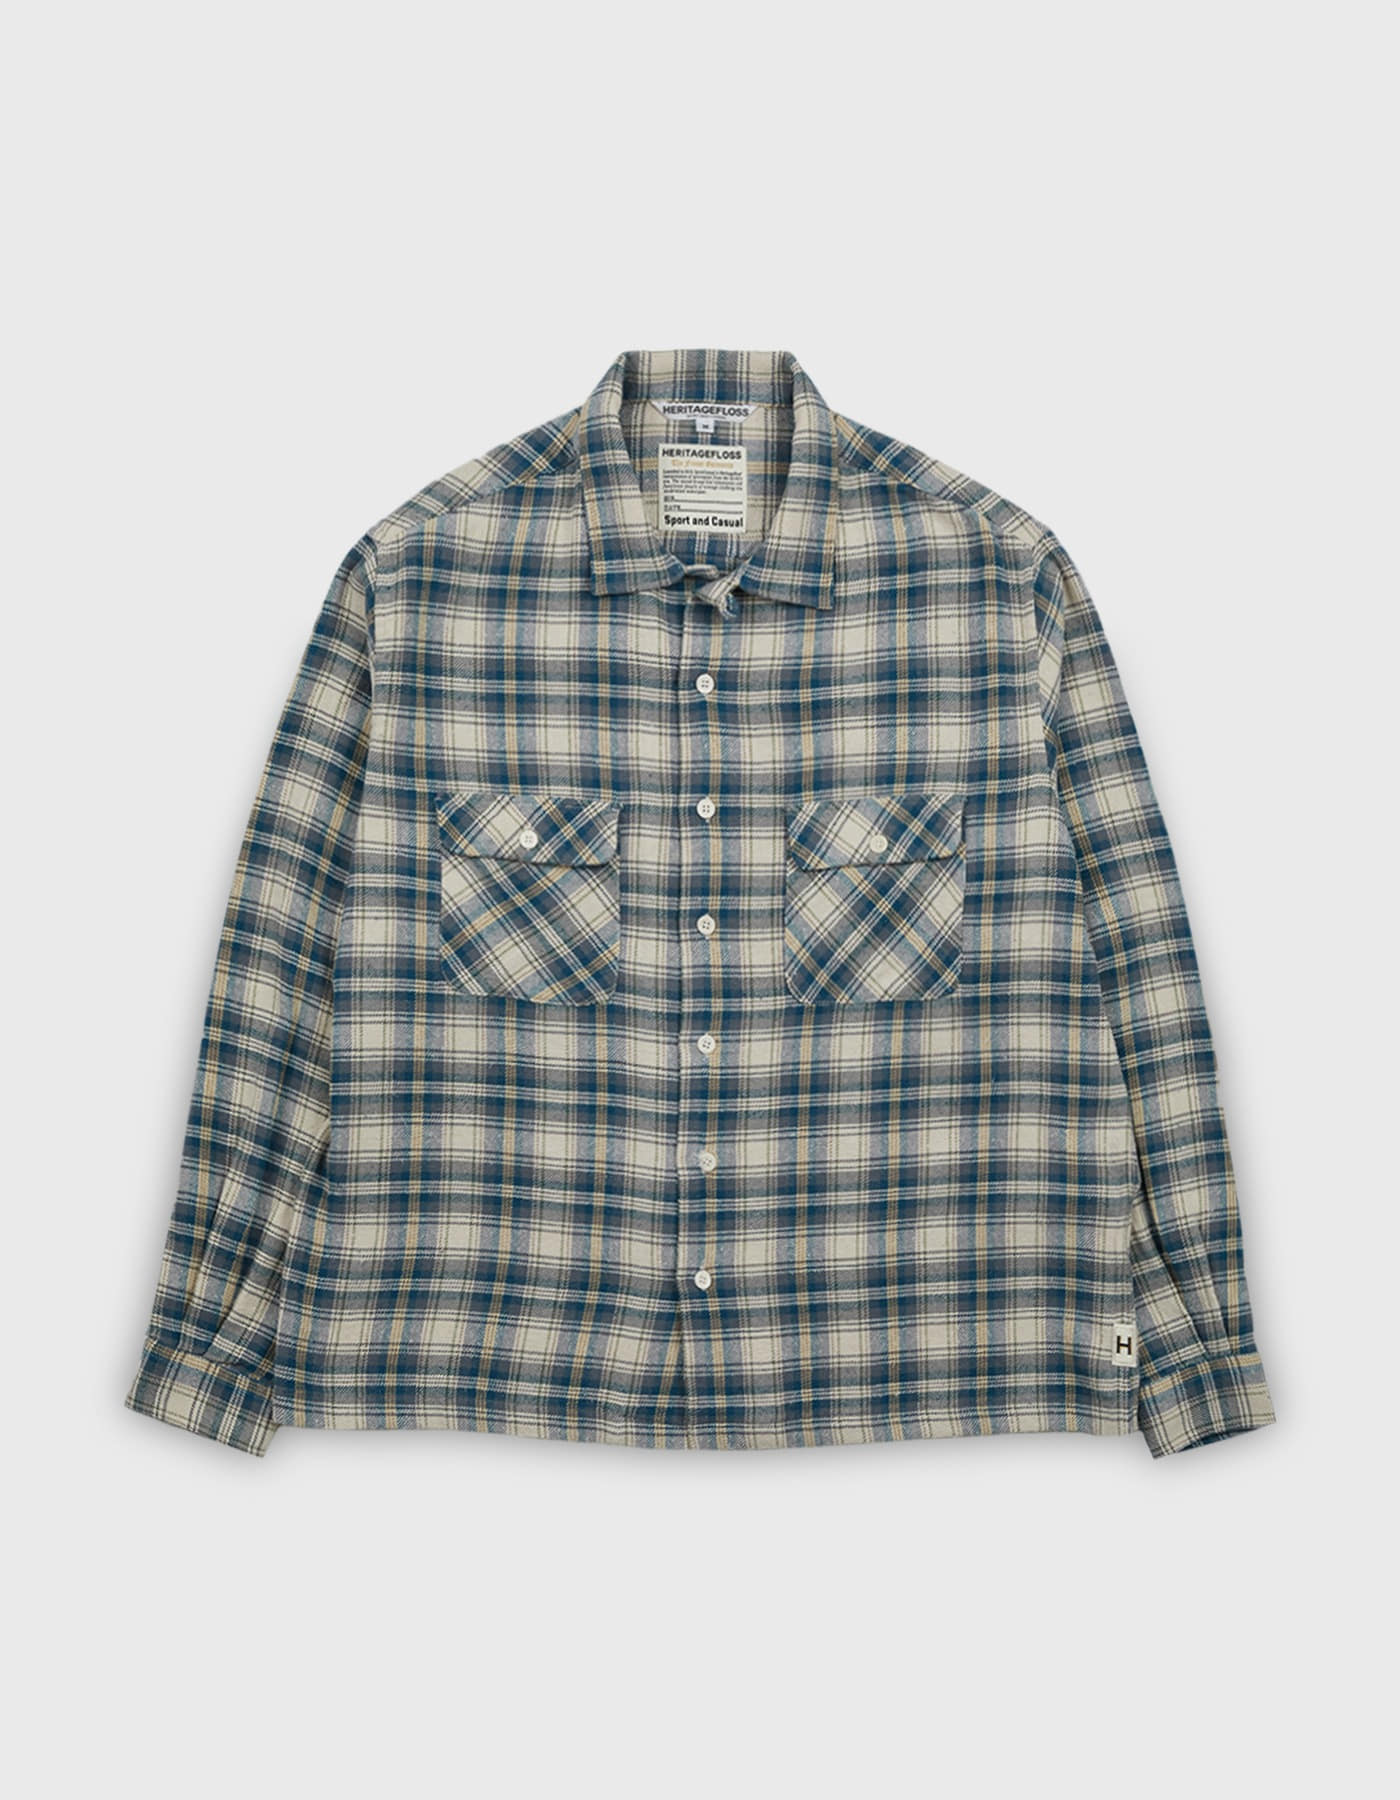 ONE WASHED FLANNEL SHIRT / Ivory-Blue